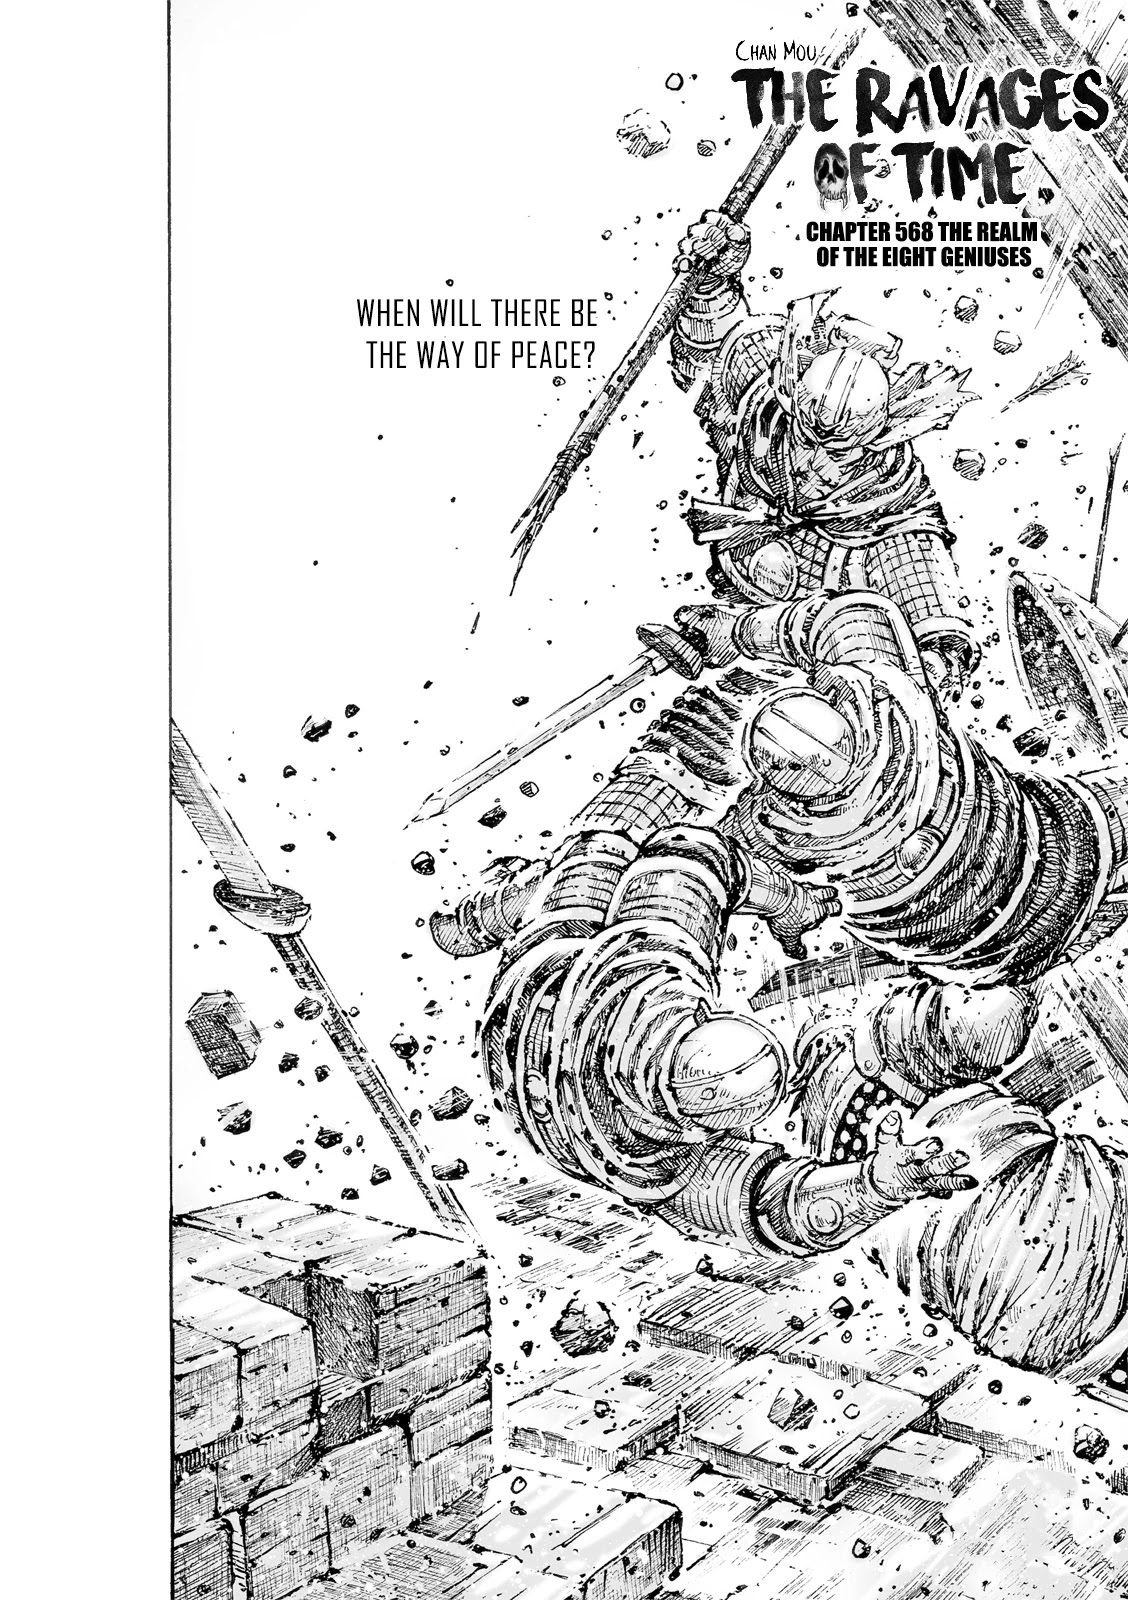 The Ravages Of Time Chapter 568: The Realm Of The Eight Geniuses - Picture 3